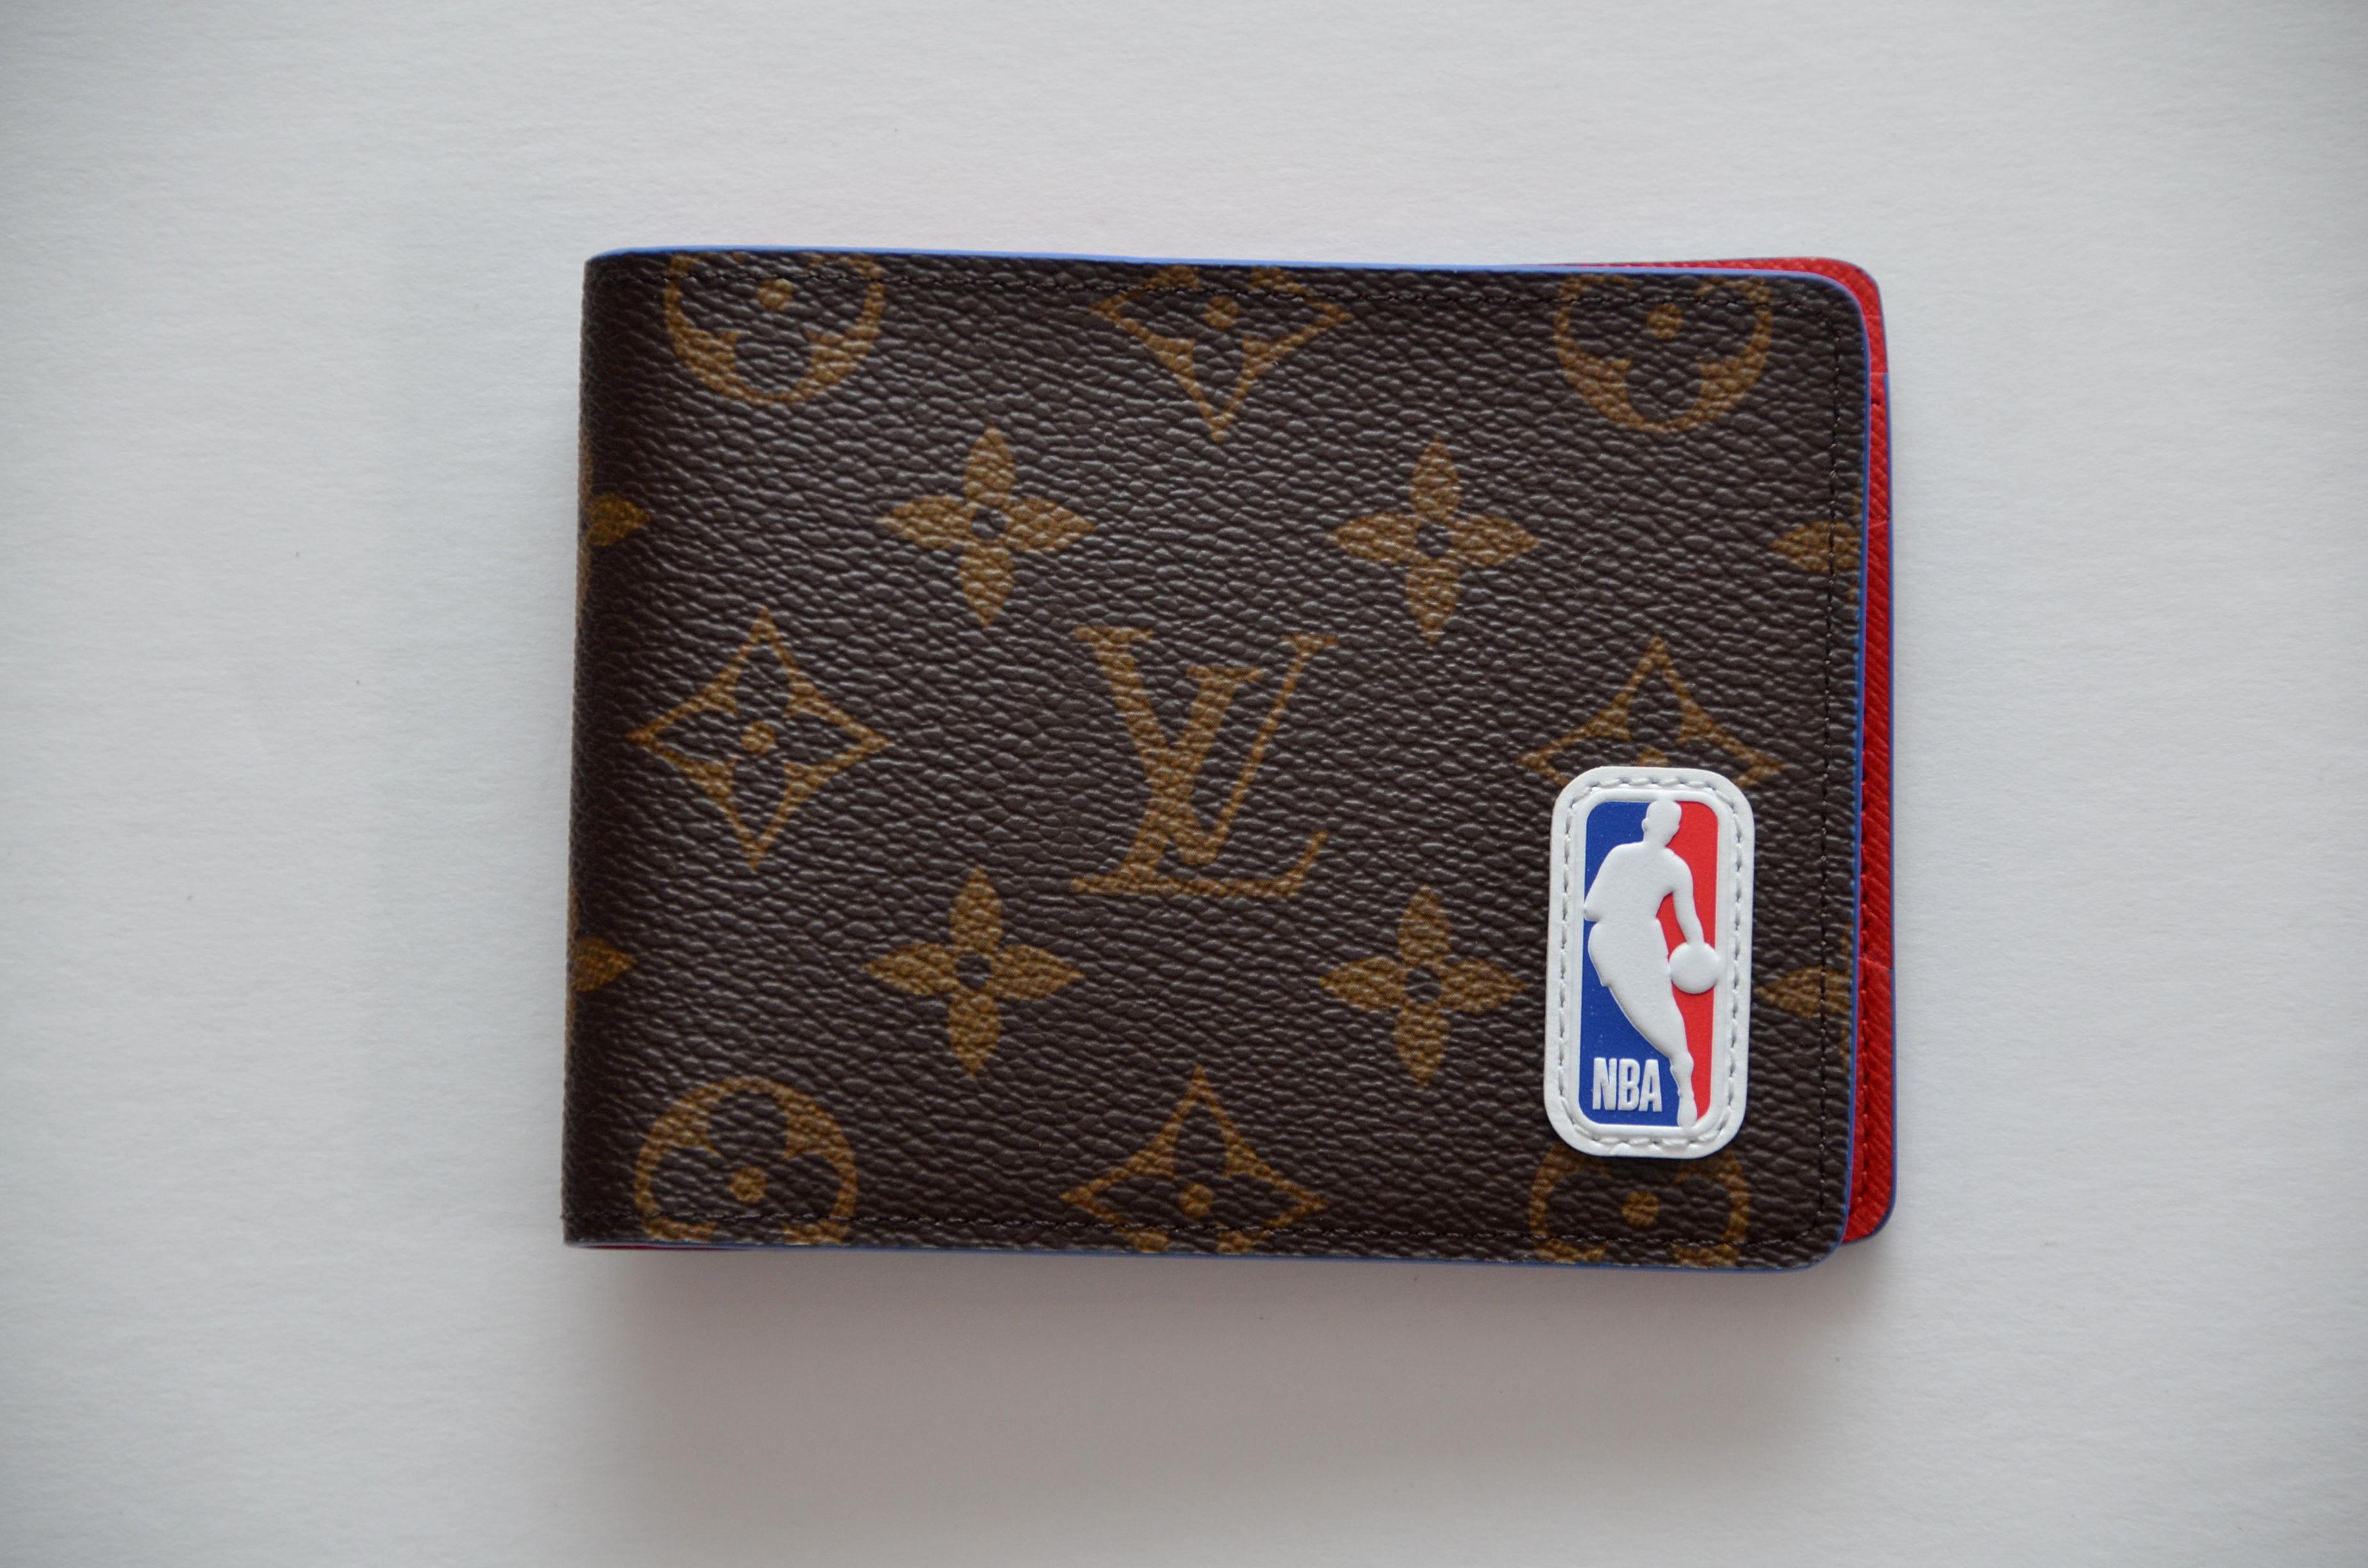 100% Guaranteed Authentic 
Louis Vuitton LV x NBA Brown Monogram Red White Blue Logo Bifold Multiple 
WalletSize: 4.5 x 3.5 x 0.6 inches (length x Height x Width)
Name: LV X NBA
Color: Brown
Style: Multiple Wallet
Material: Monogram Coated